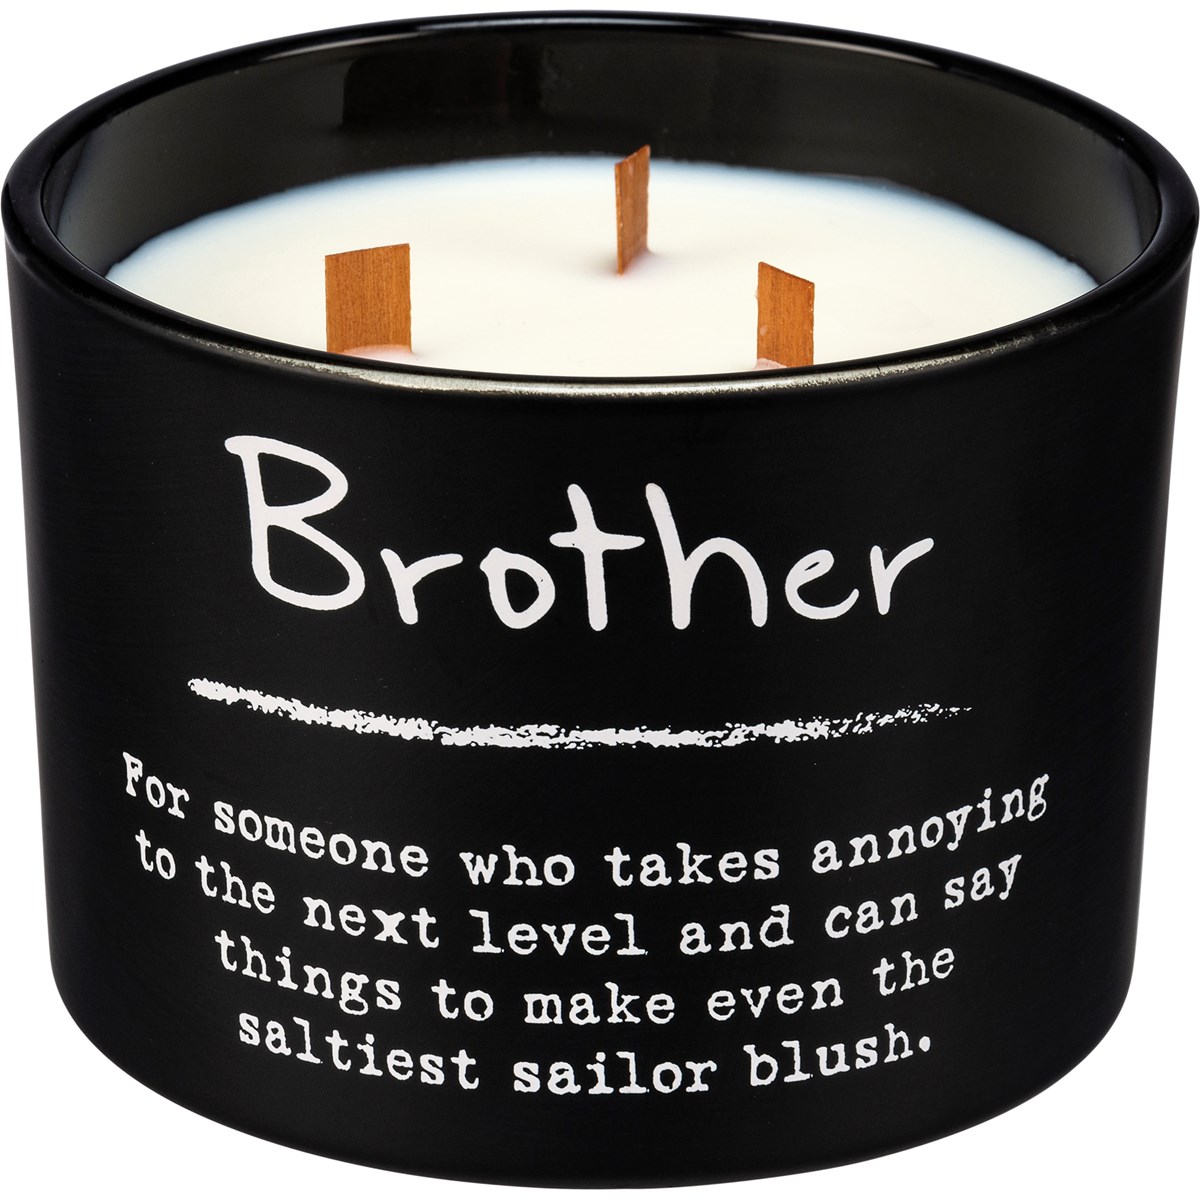 Brother Jar Candle - Soy Wax, Glass, Wood